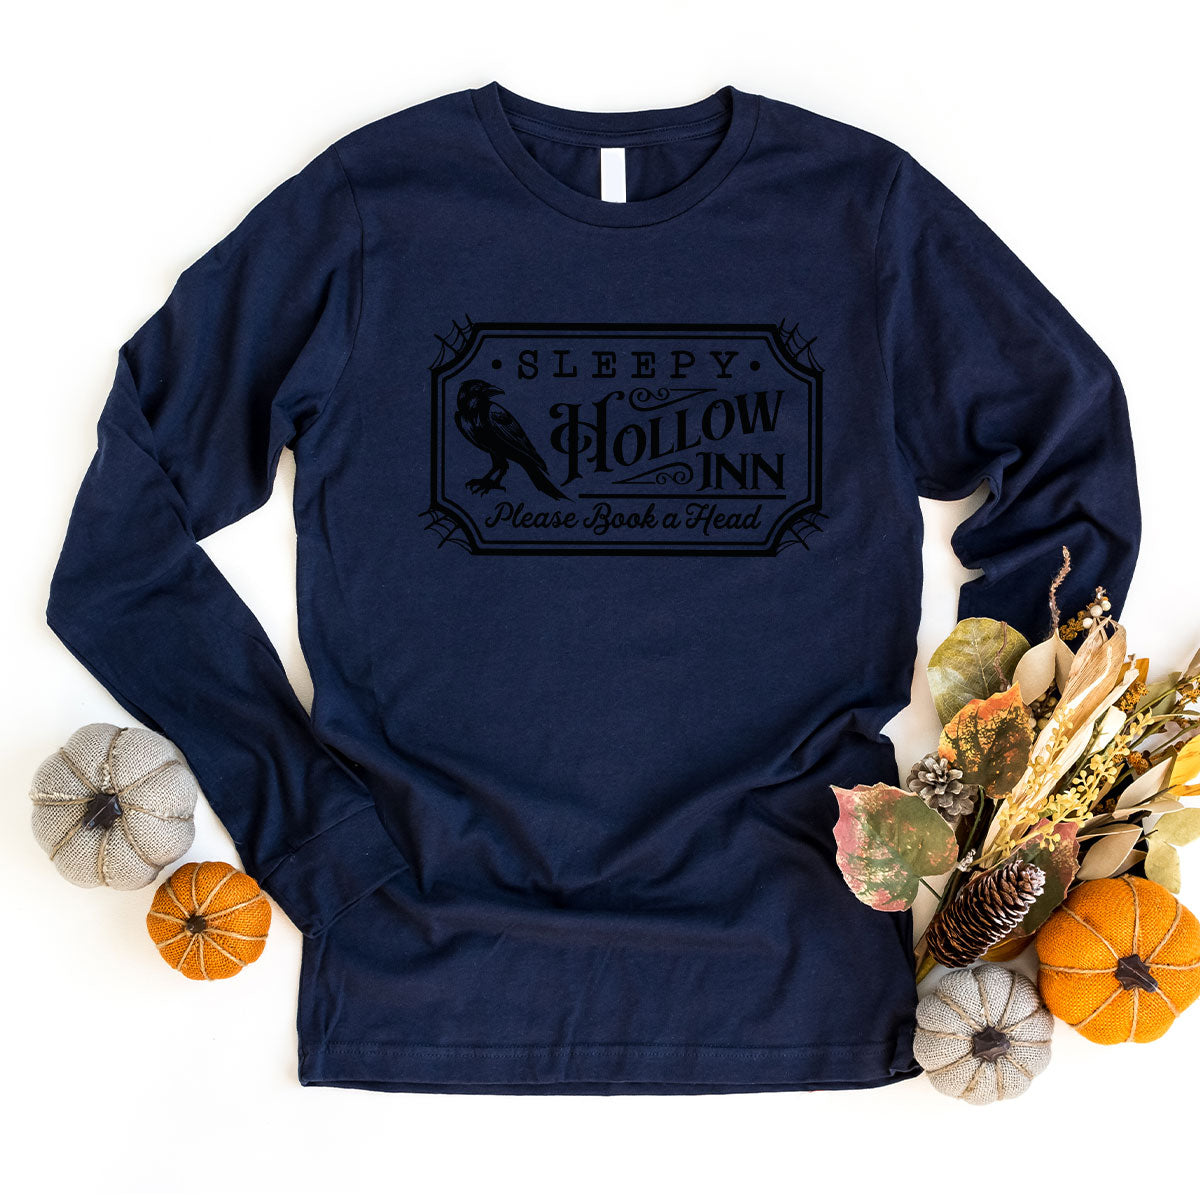 Halloween Crewneck Sweatshirt, Crow Graphic Tees, Gift for Him, Cool Movie T-Shirt, Gift for Her, Spooky Season Party VNeck Shirt